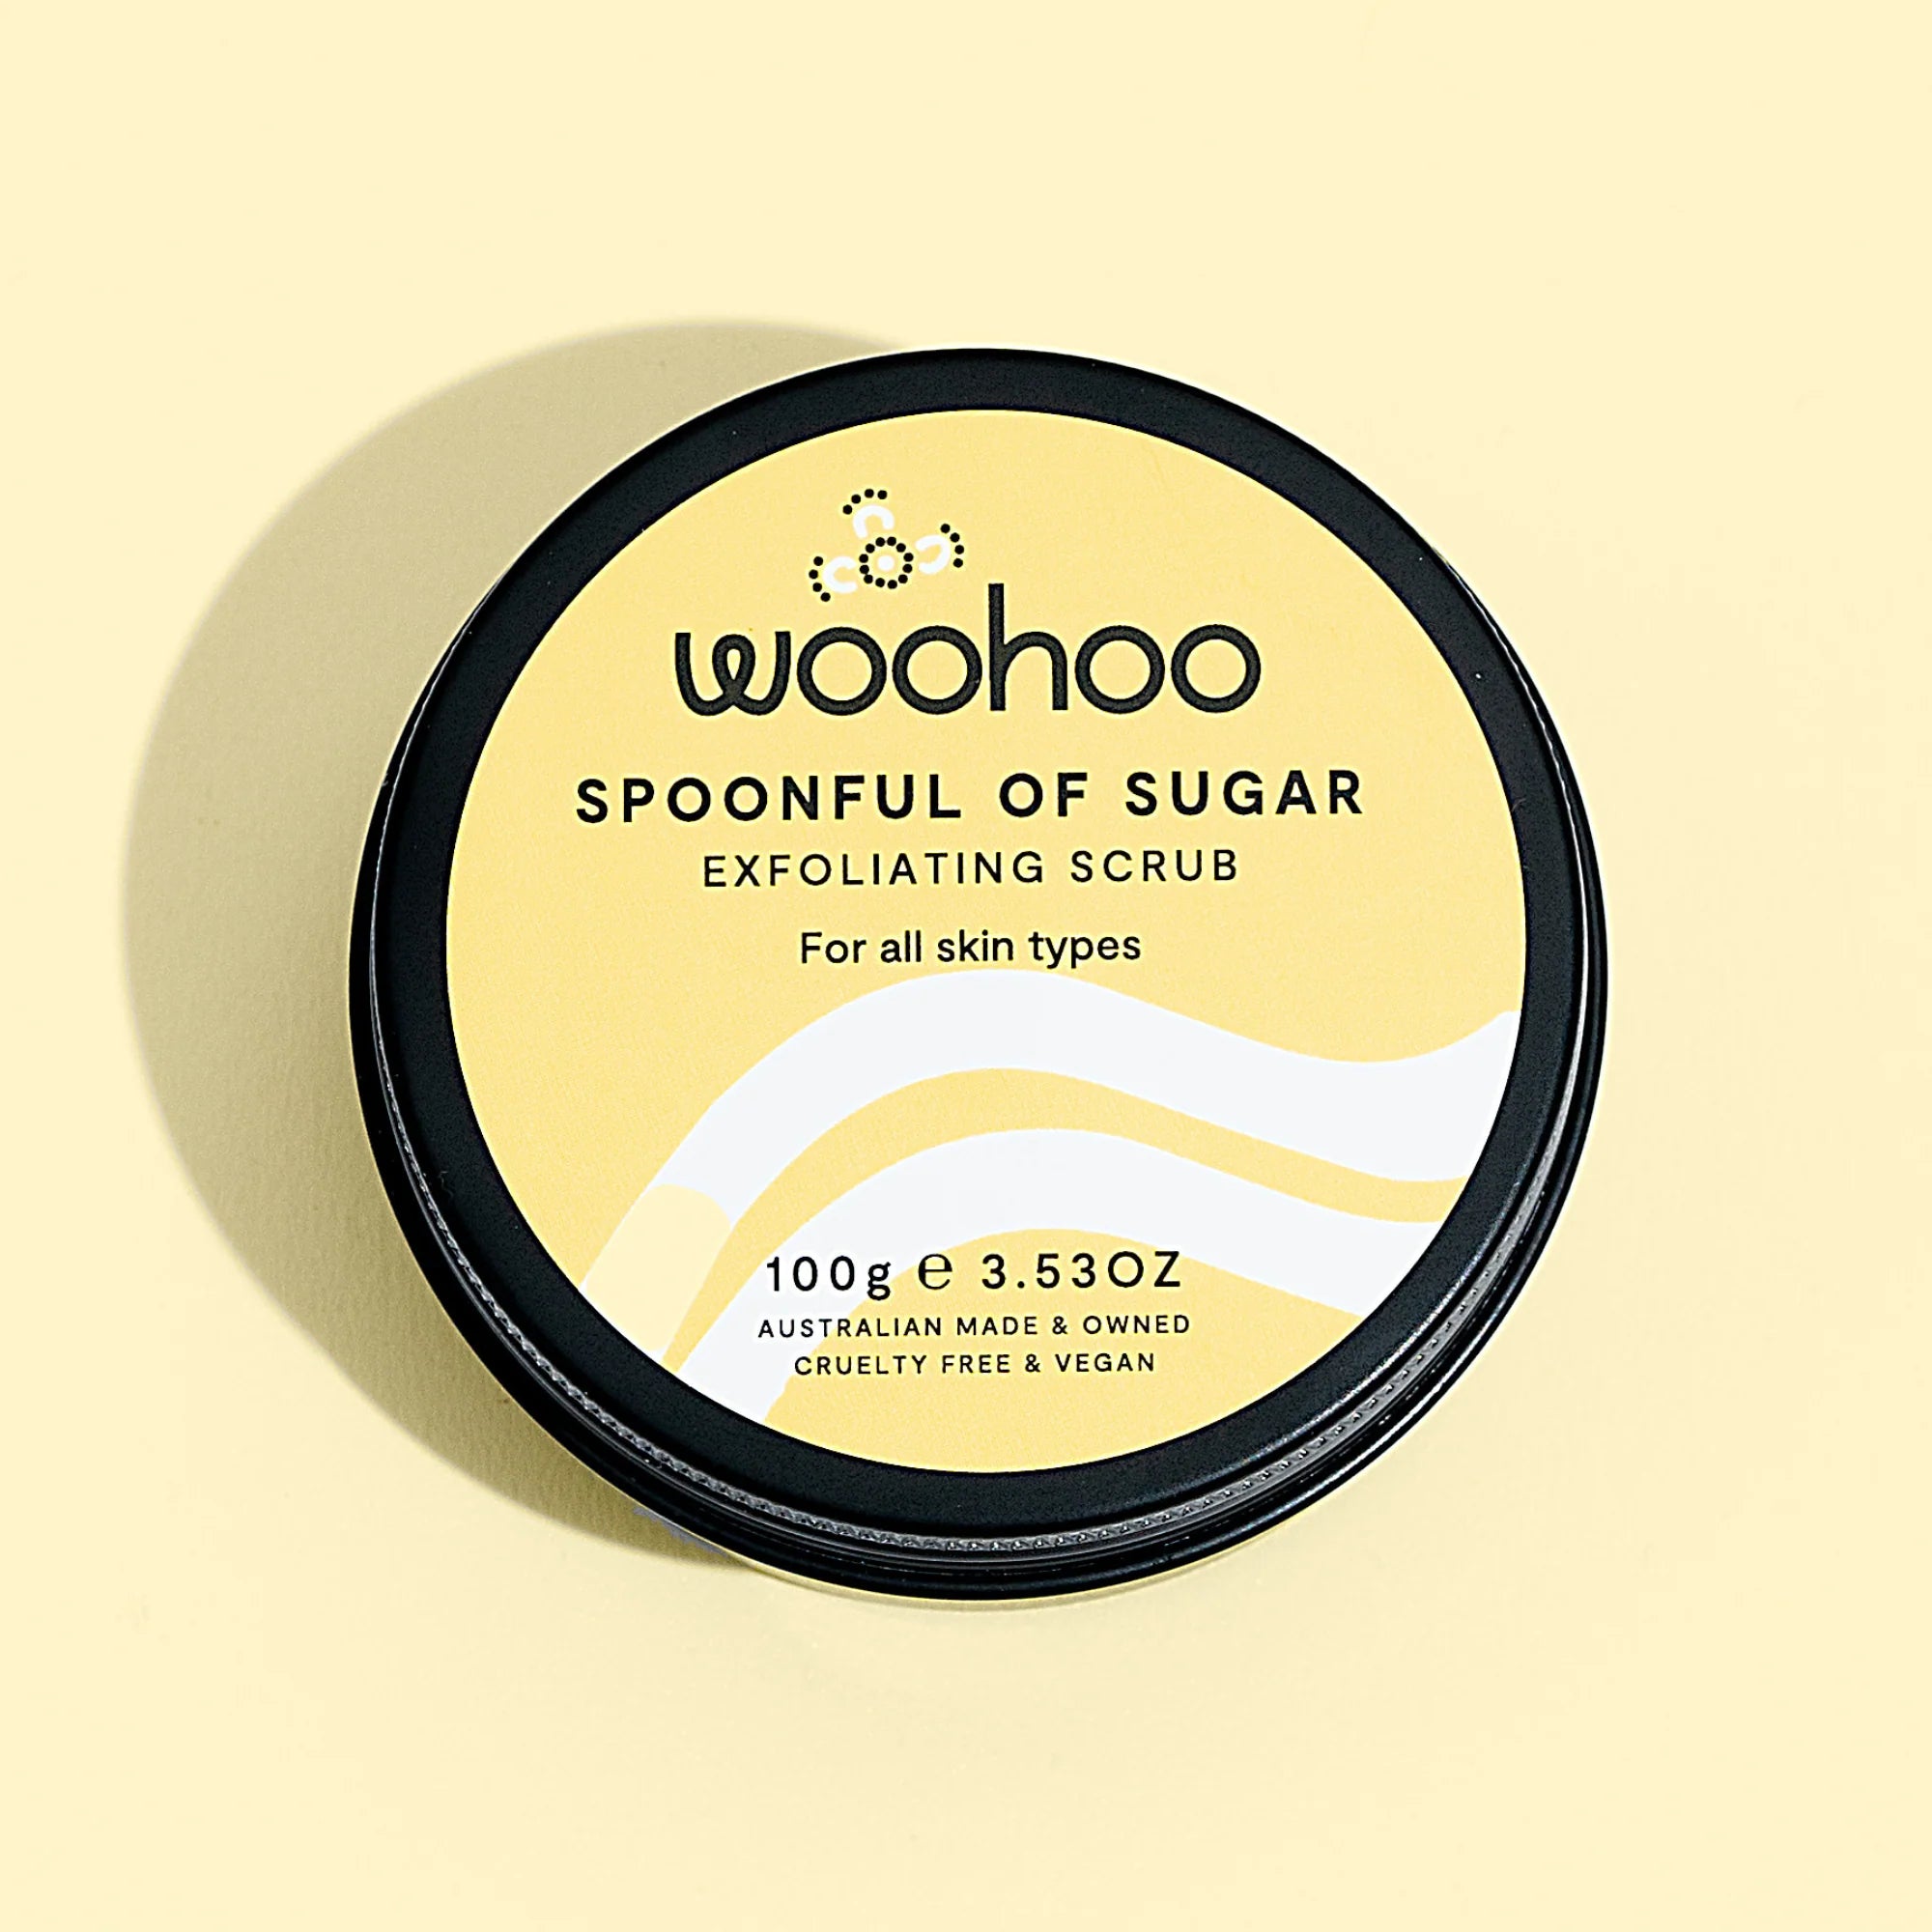 Image of the Woohoo Spoonful of Sugar Exfoliating Scrub tin on a yellow background